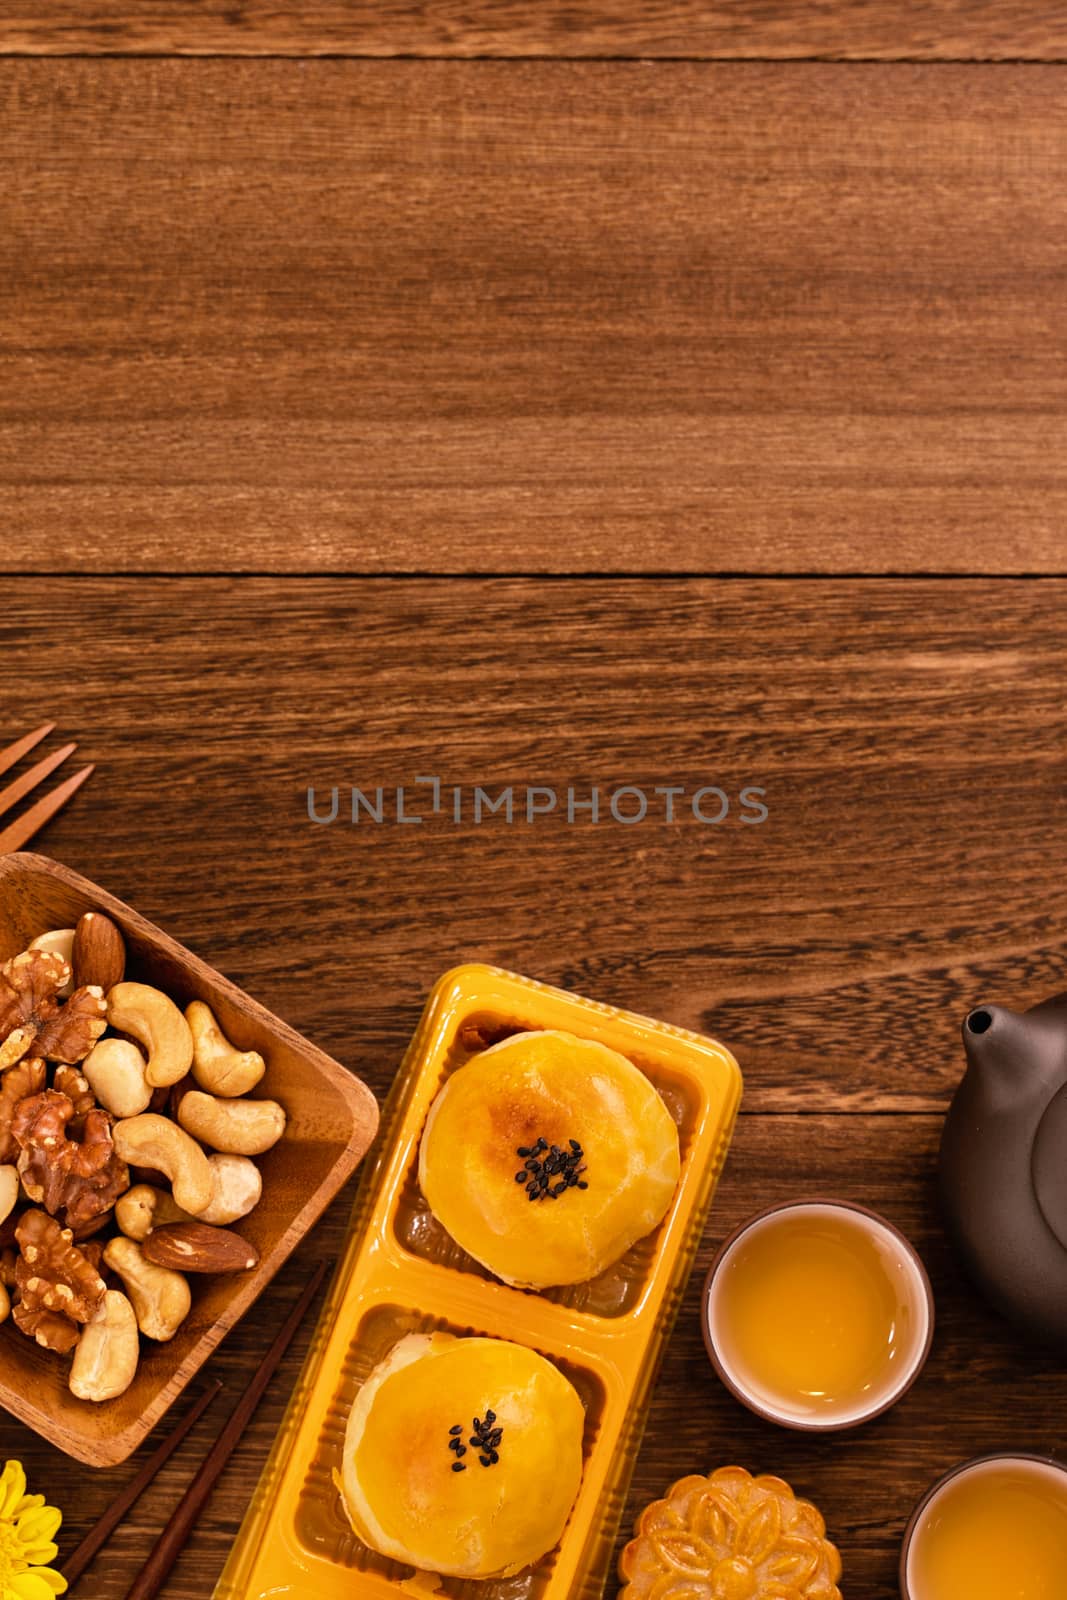 Moon cake for Mid-Autumn Festival, delicious beautiful fresh mooncake on a plate over dark wooden background table, top view, flat lay layout design concept.